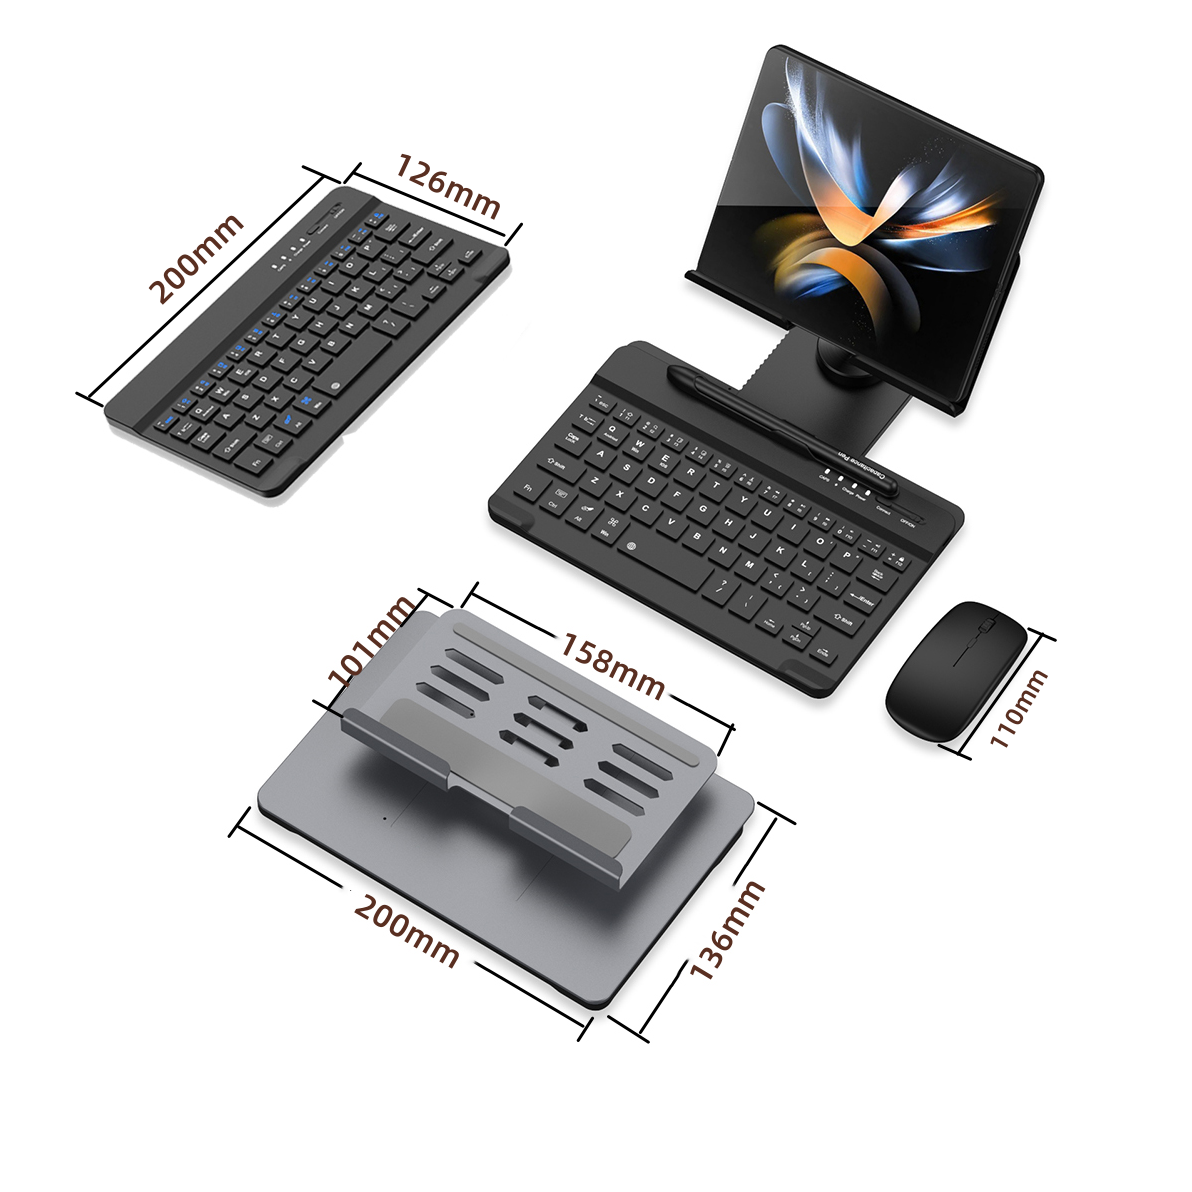 Desk Stand and Bluetooth Keyboard for Samsung Galaxy Z Fold Series